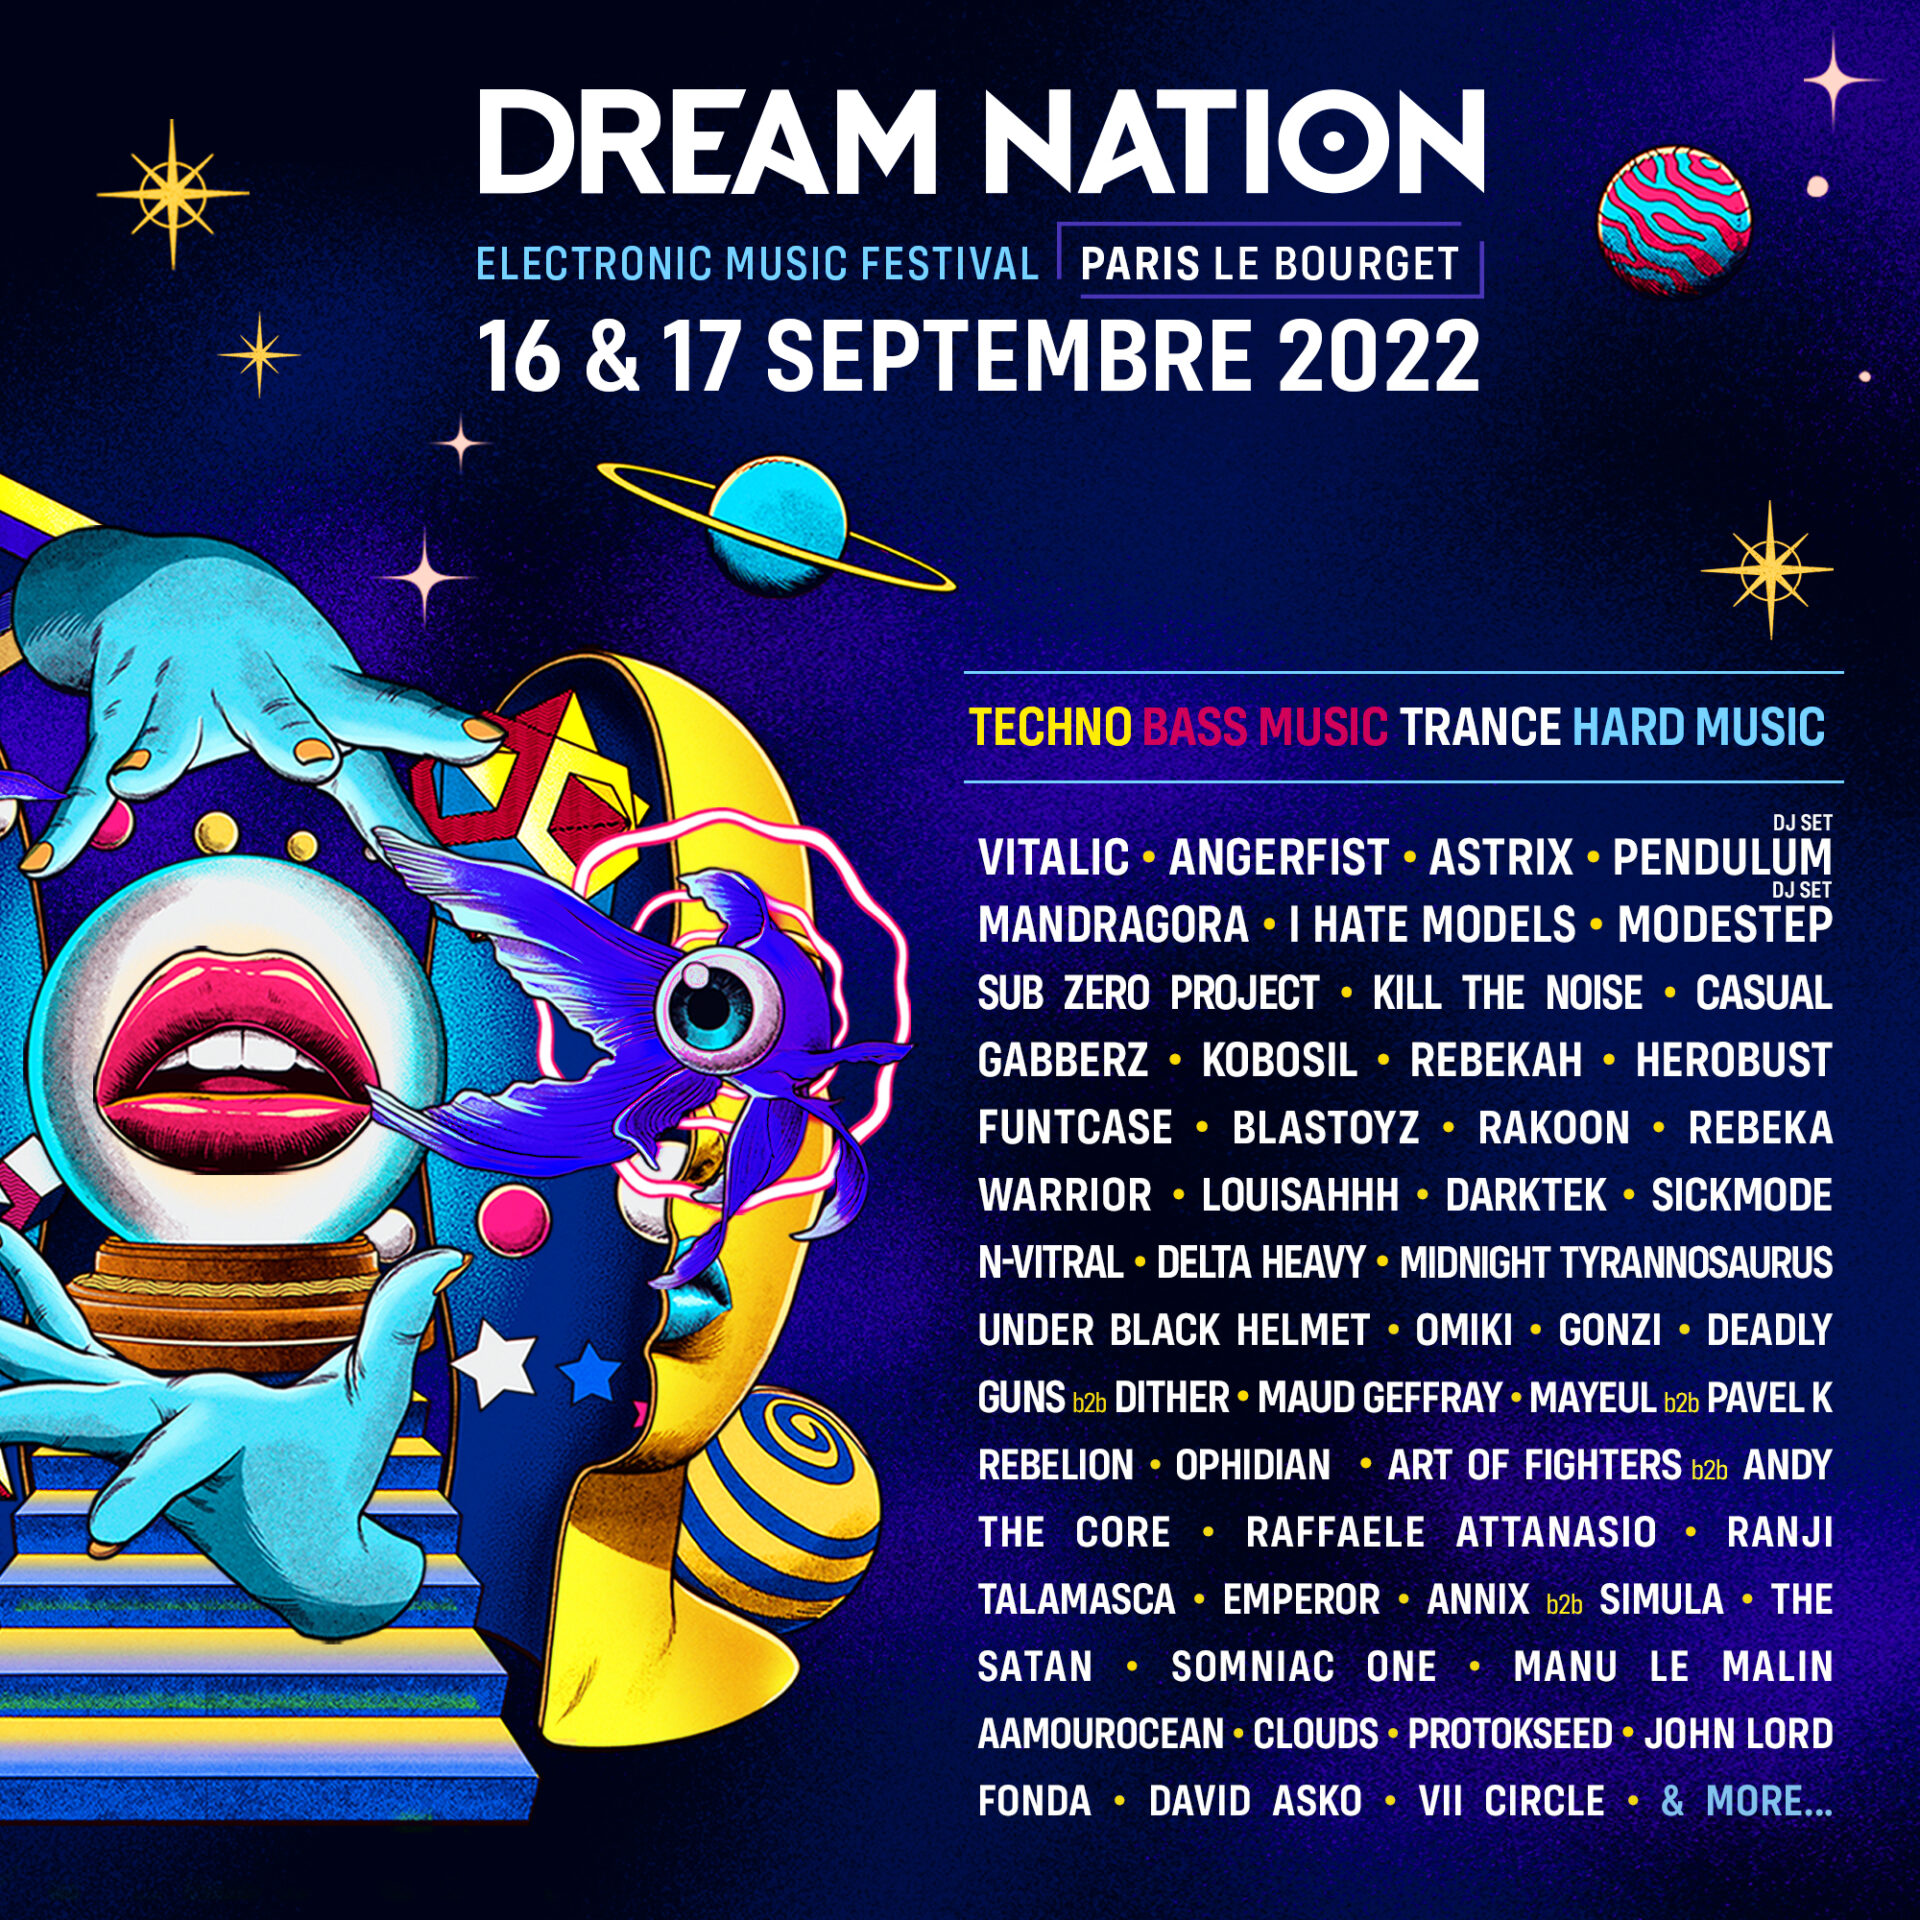 2*2 TICKETS FOR DREAM NATION